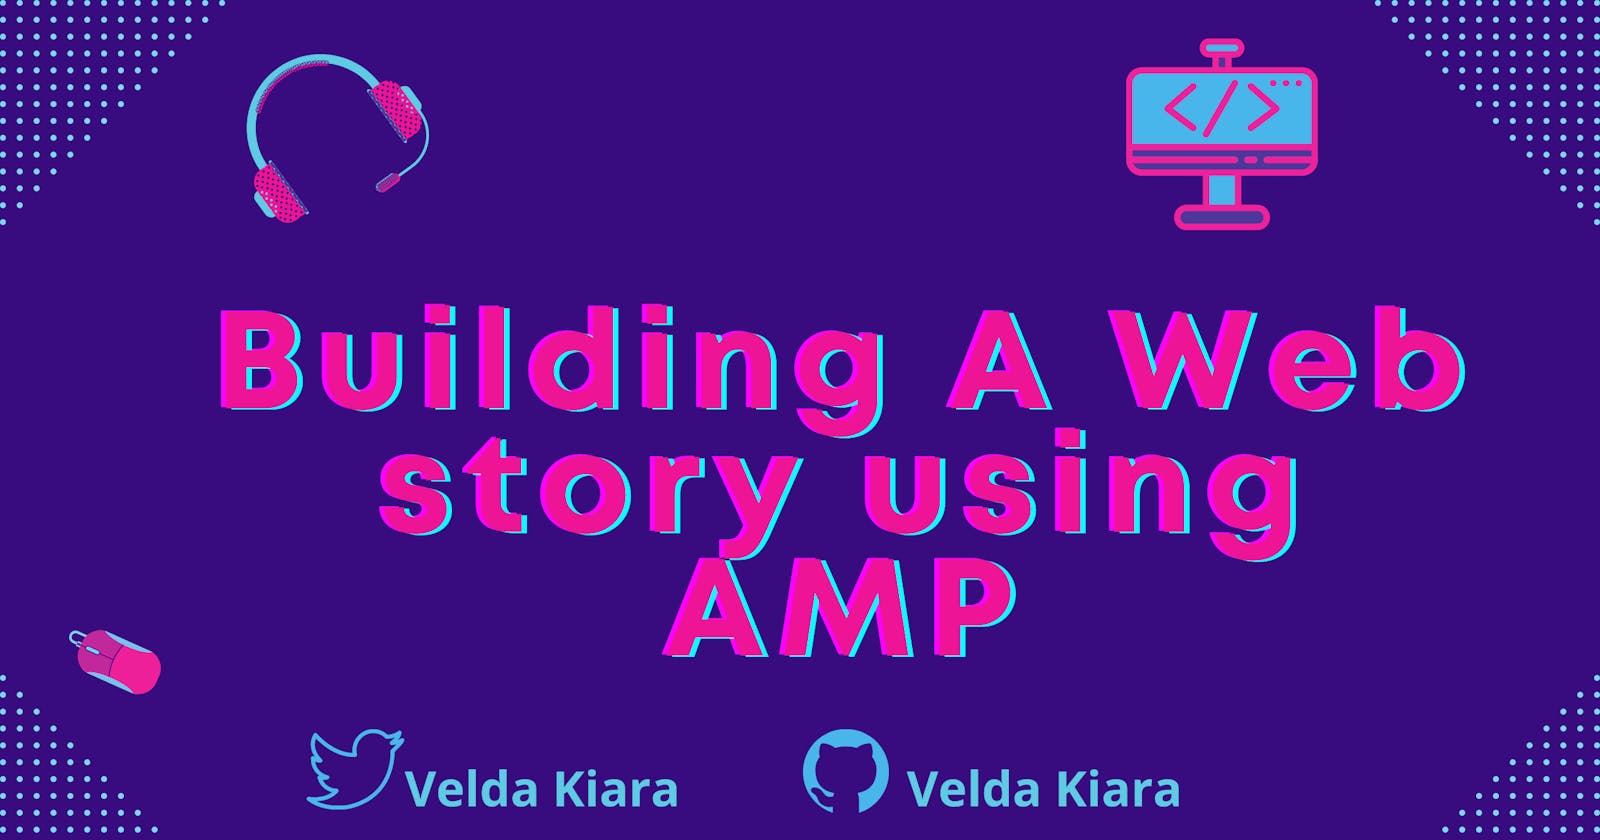 Building A Web Story Using AMP